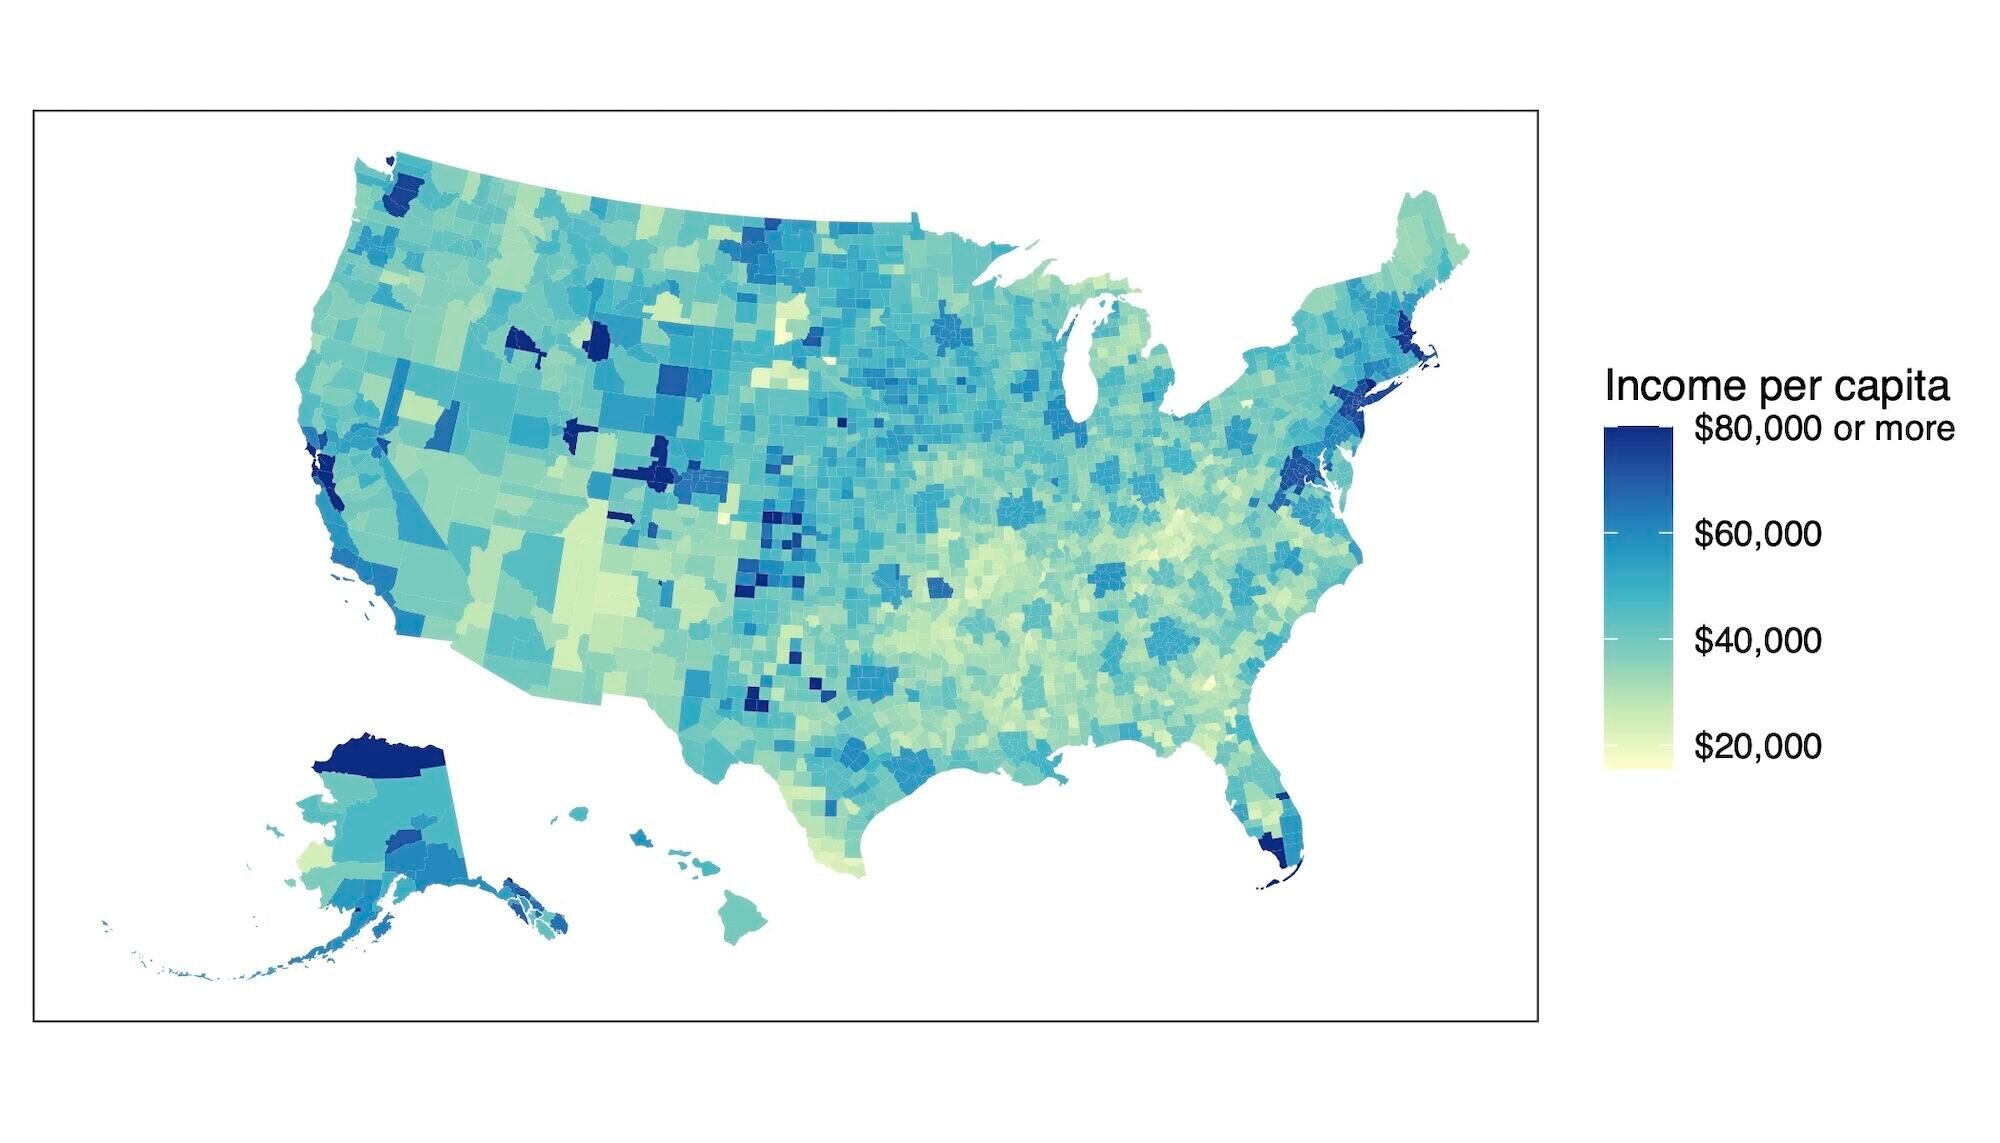 Disparity dynamics: Geographic impact of social transfer programs on income inequality